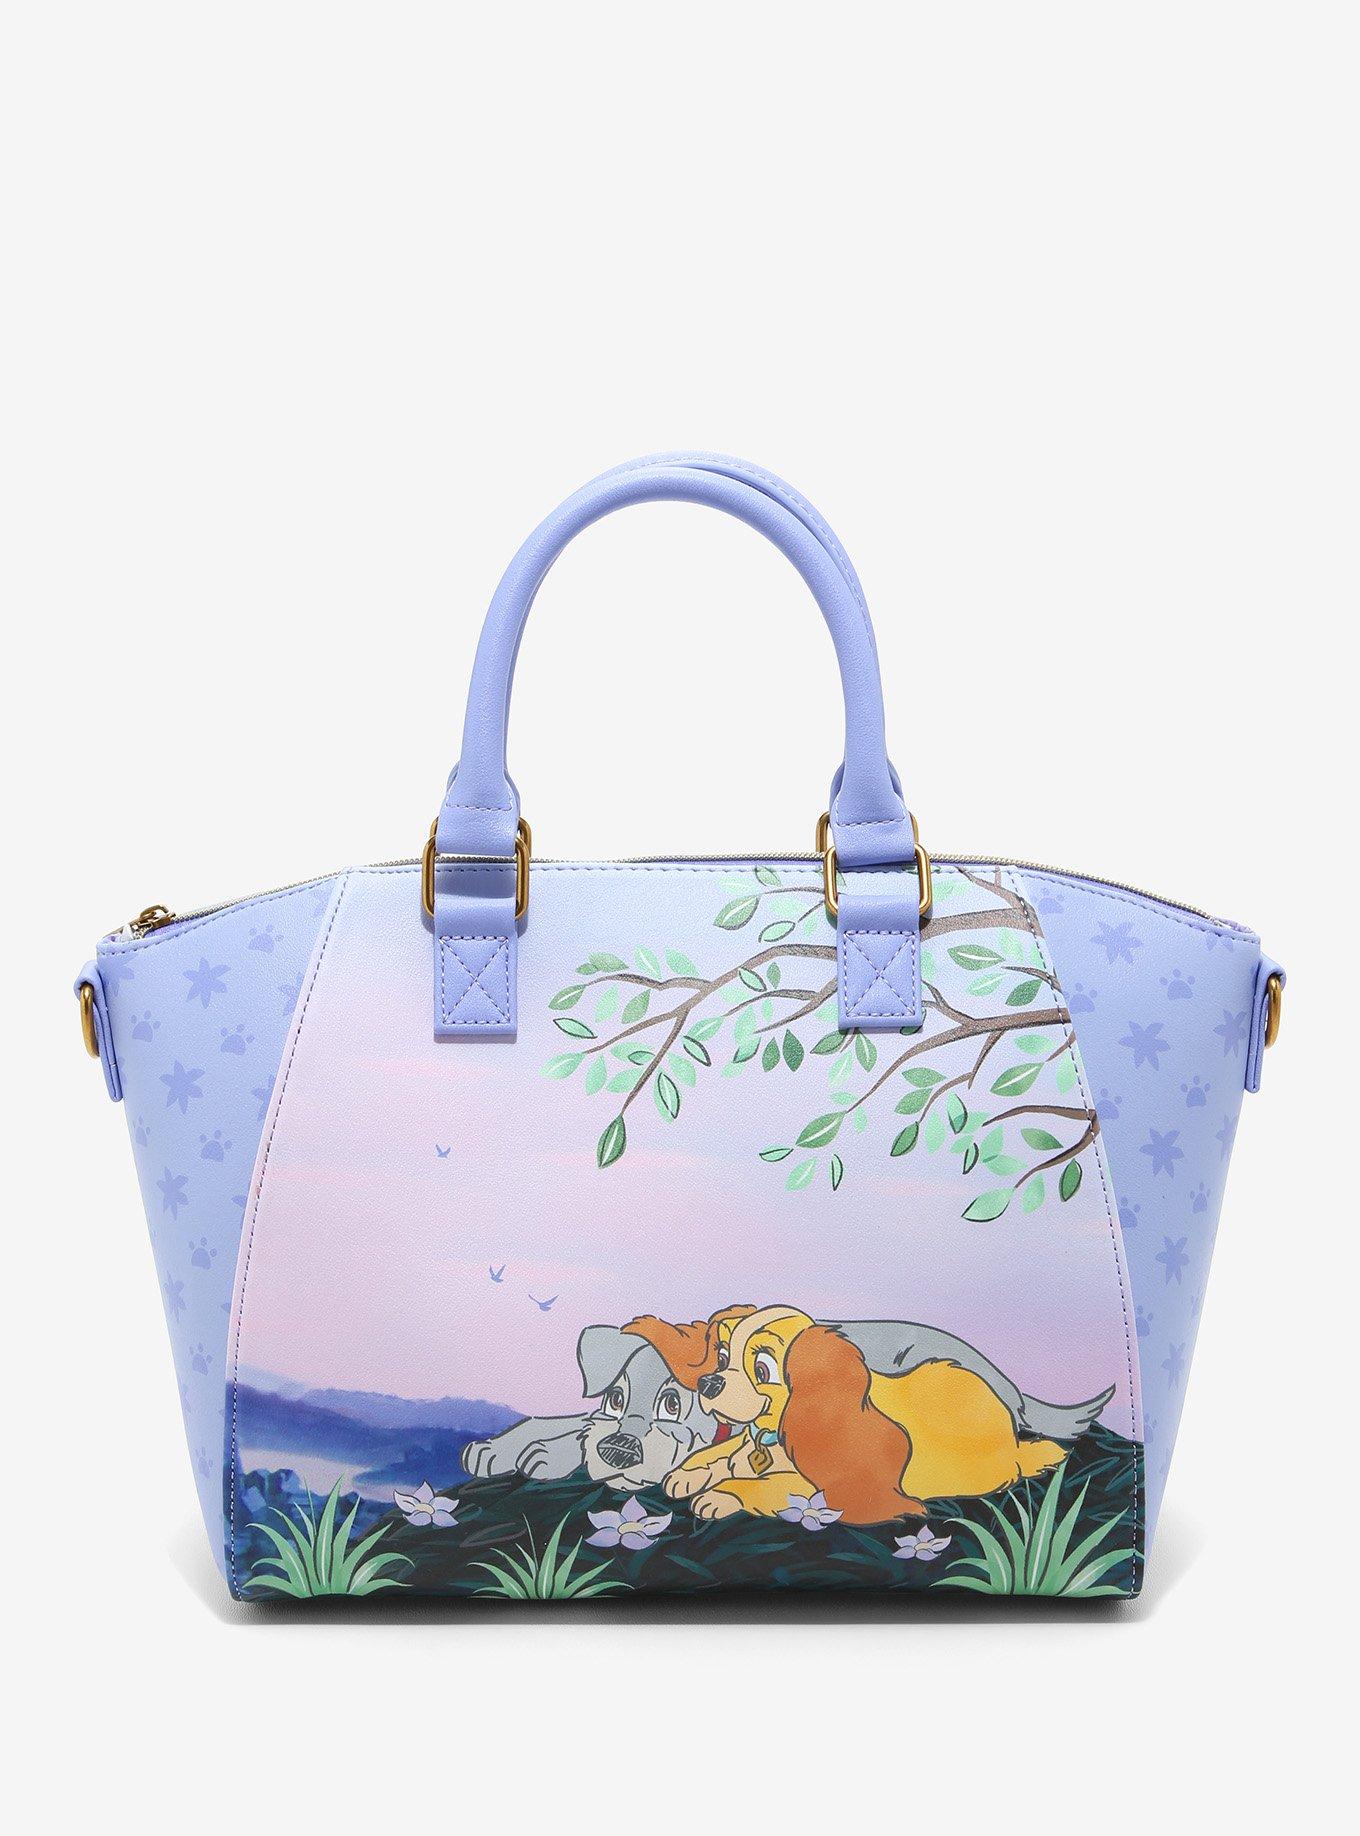 Loungefly Disney Lady And The Tramp Sunset Satchel Bag, , hi-res